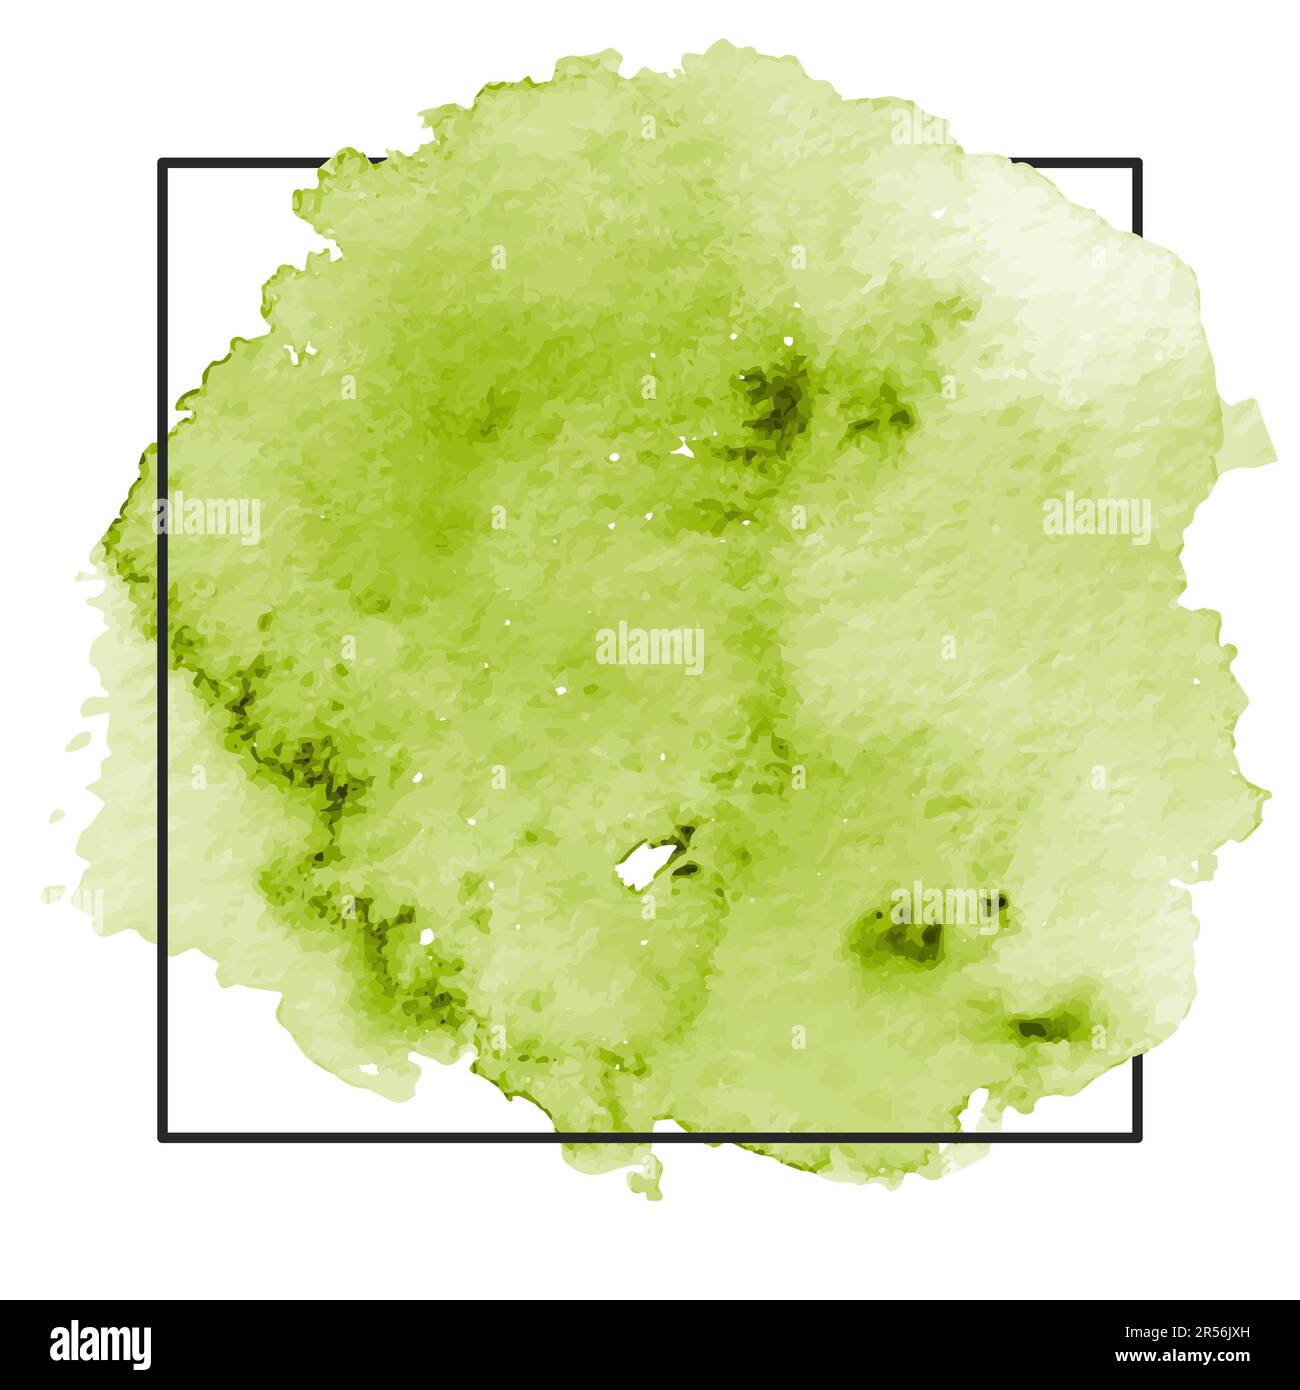 Lime green watercolor brush strokes over square frame. Aesthetic background. Aquarelle stain with color shades paint stroke and splash texture. Art Stock Vector